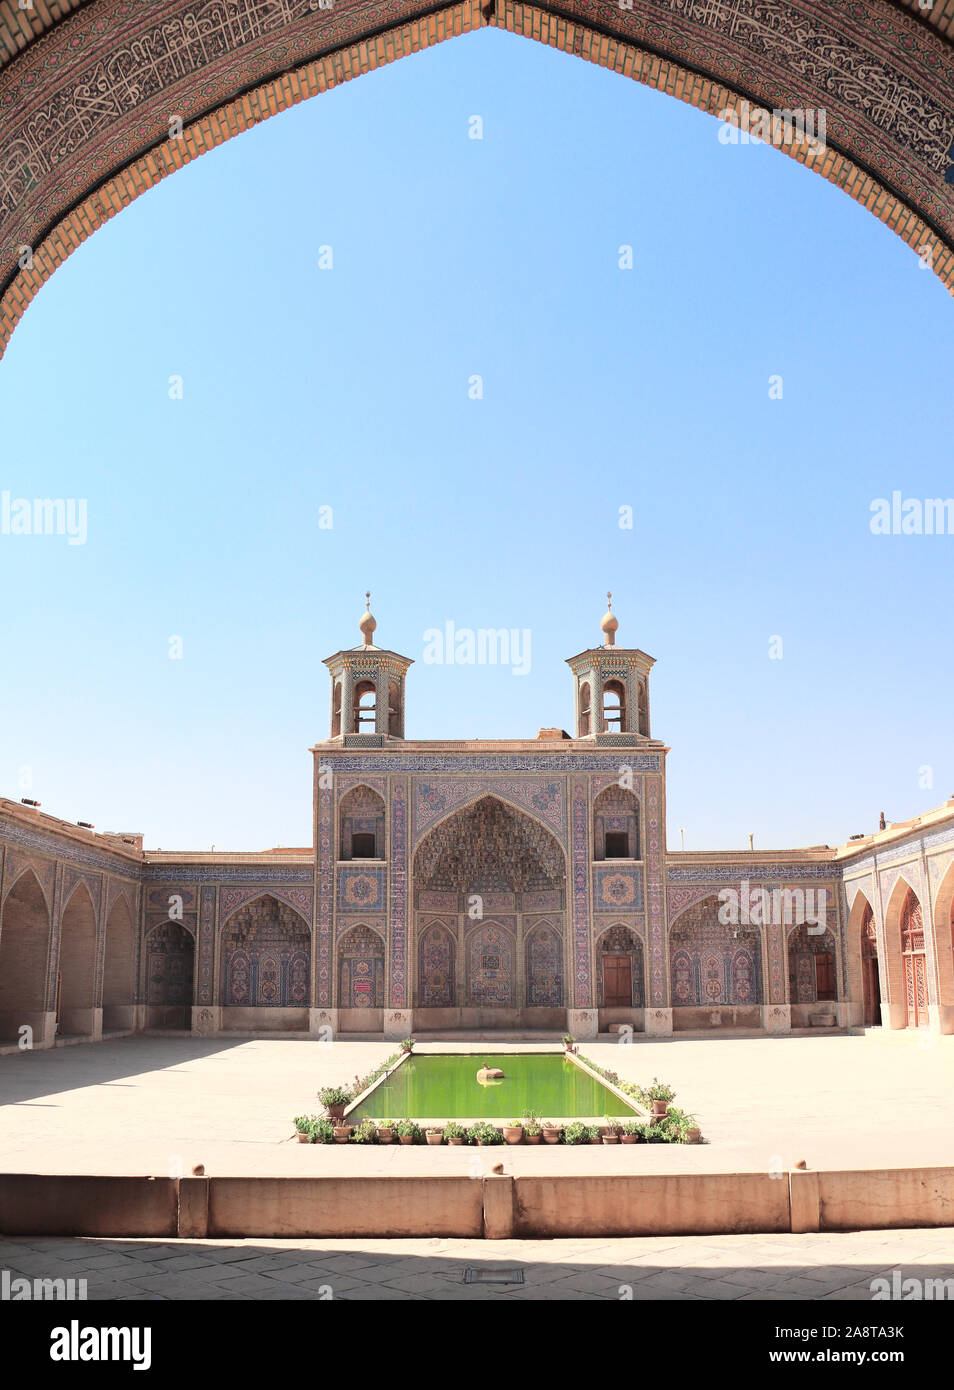 Pool in traditional courtyard of the Nasir al-Mulk Mosque (Pink Mosque) in Shiraz, Iran Stock Photo